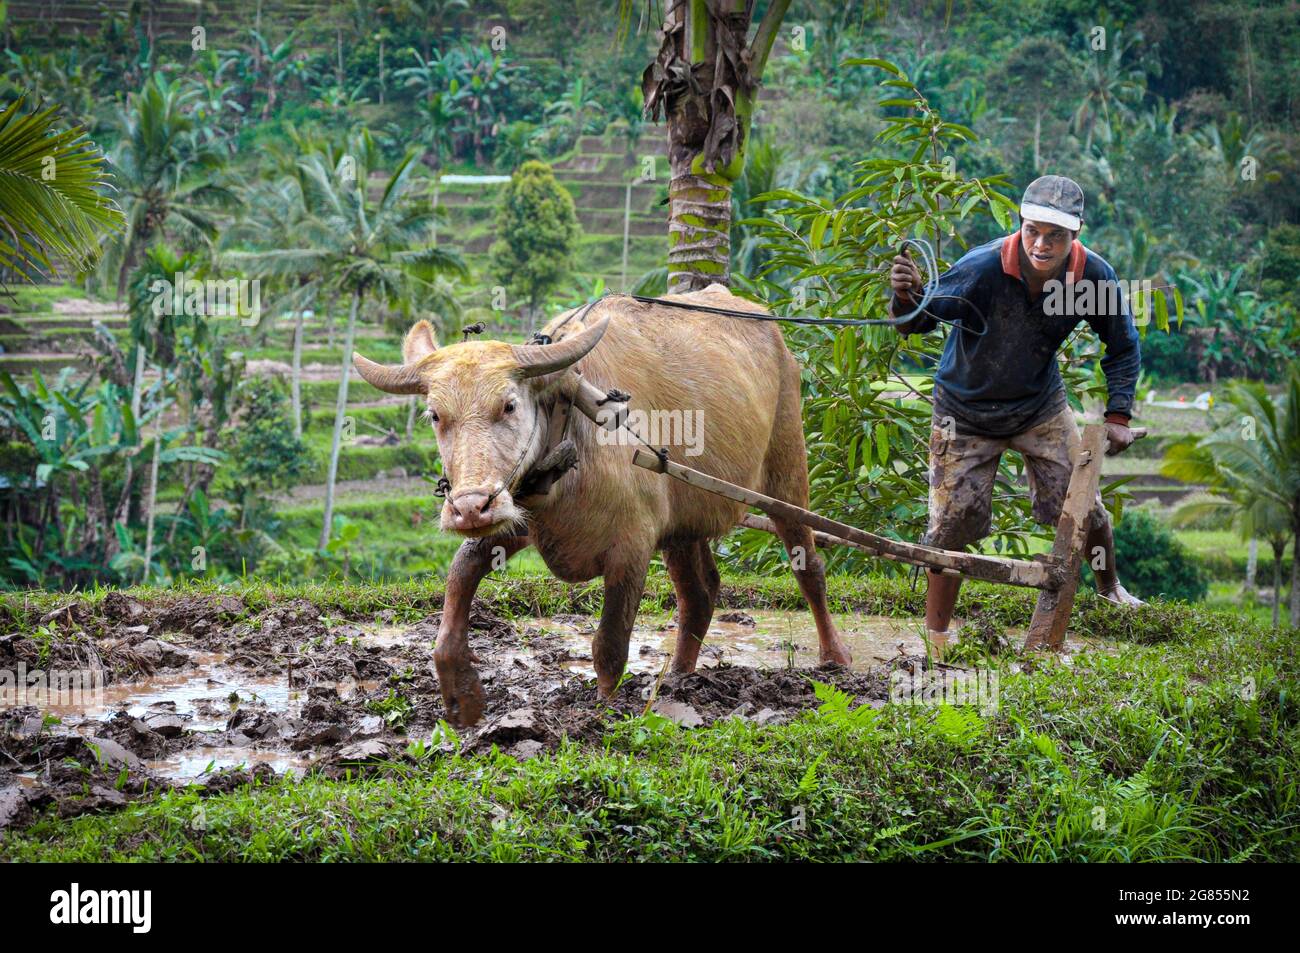 A buffalo harnessed to a furrowing plough in a flooded rice paddy field in Bali, Indonesia. Stock Photo